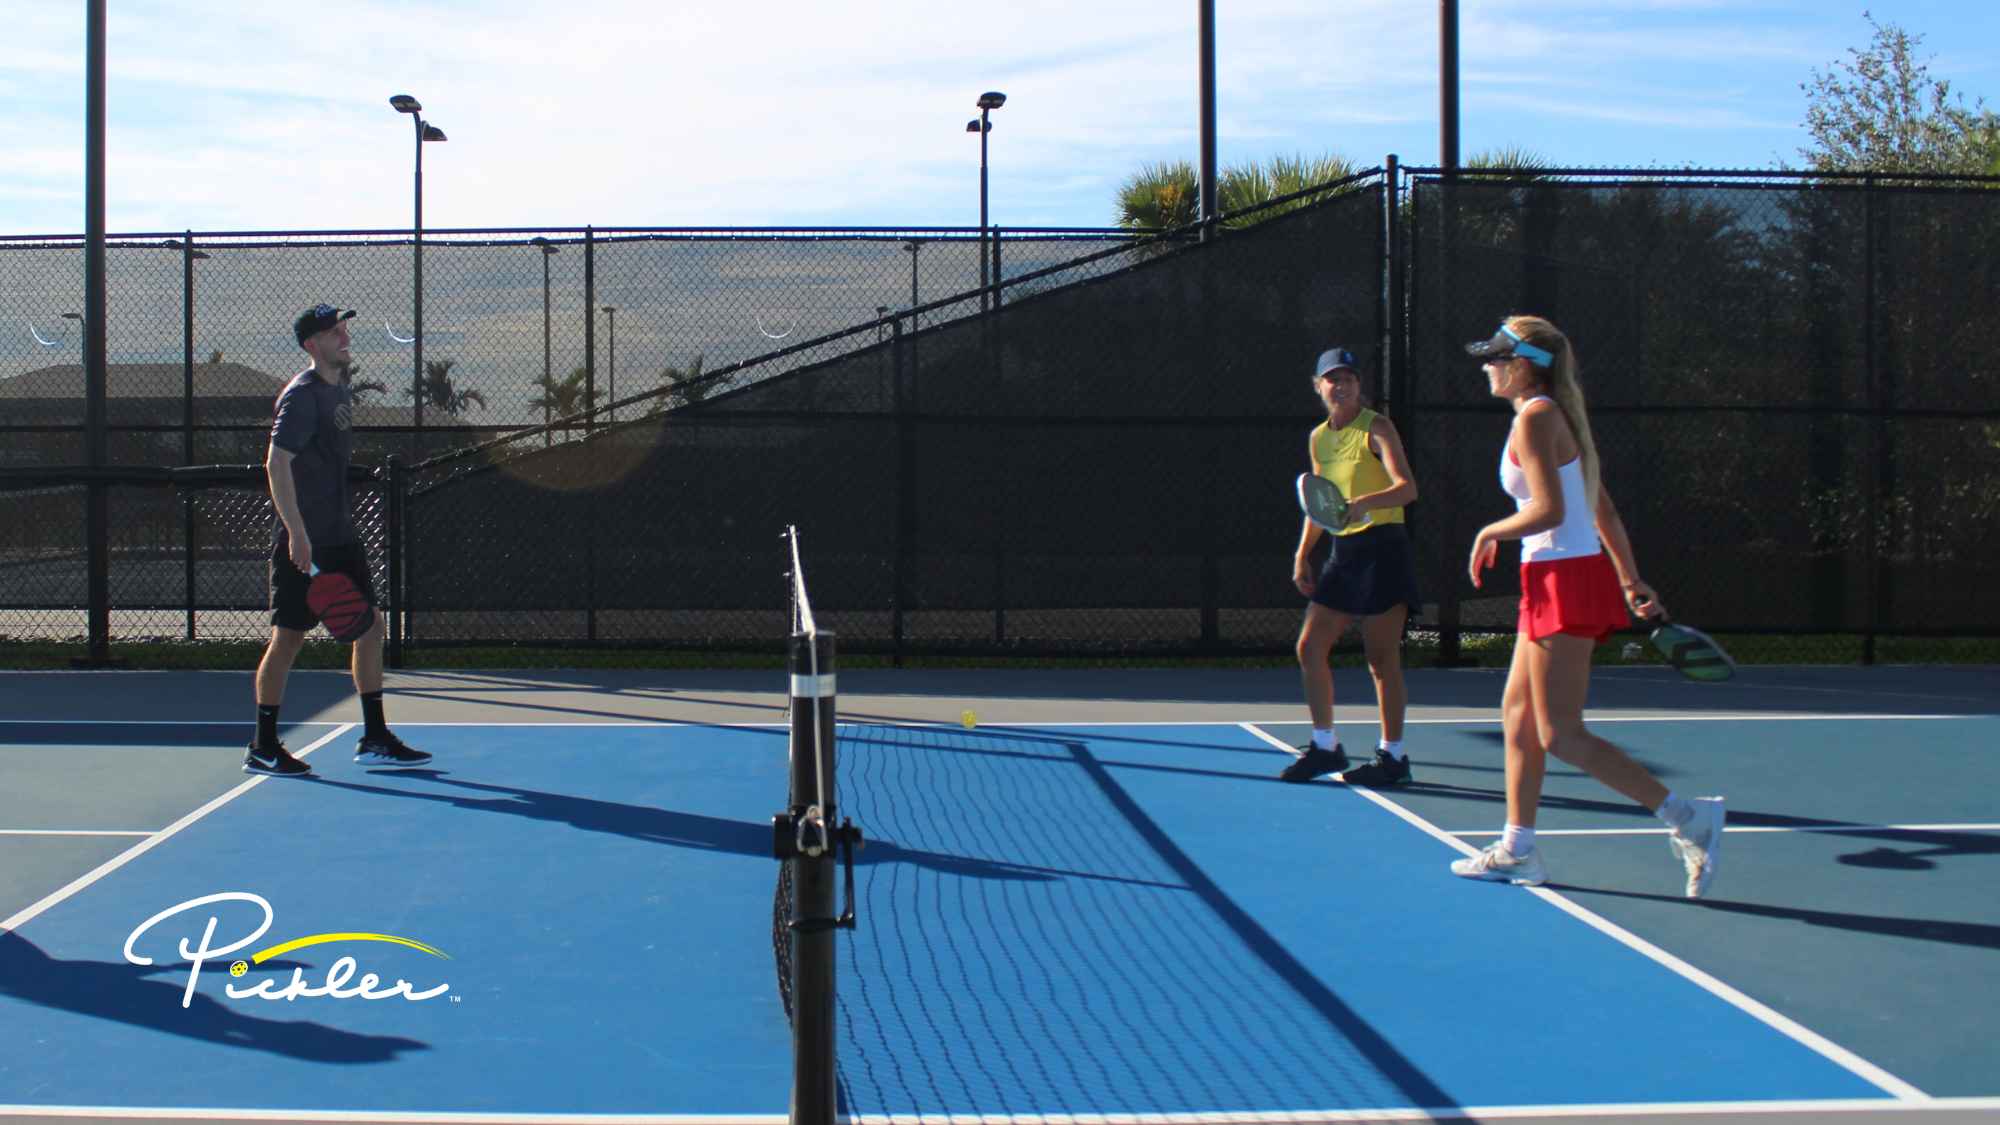 Improve Your Pickleball Hand Speed with These 2 Drills